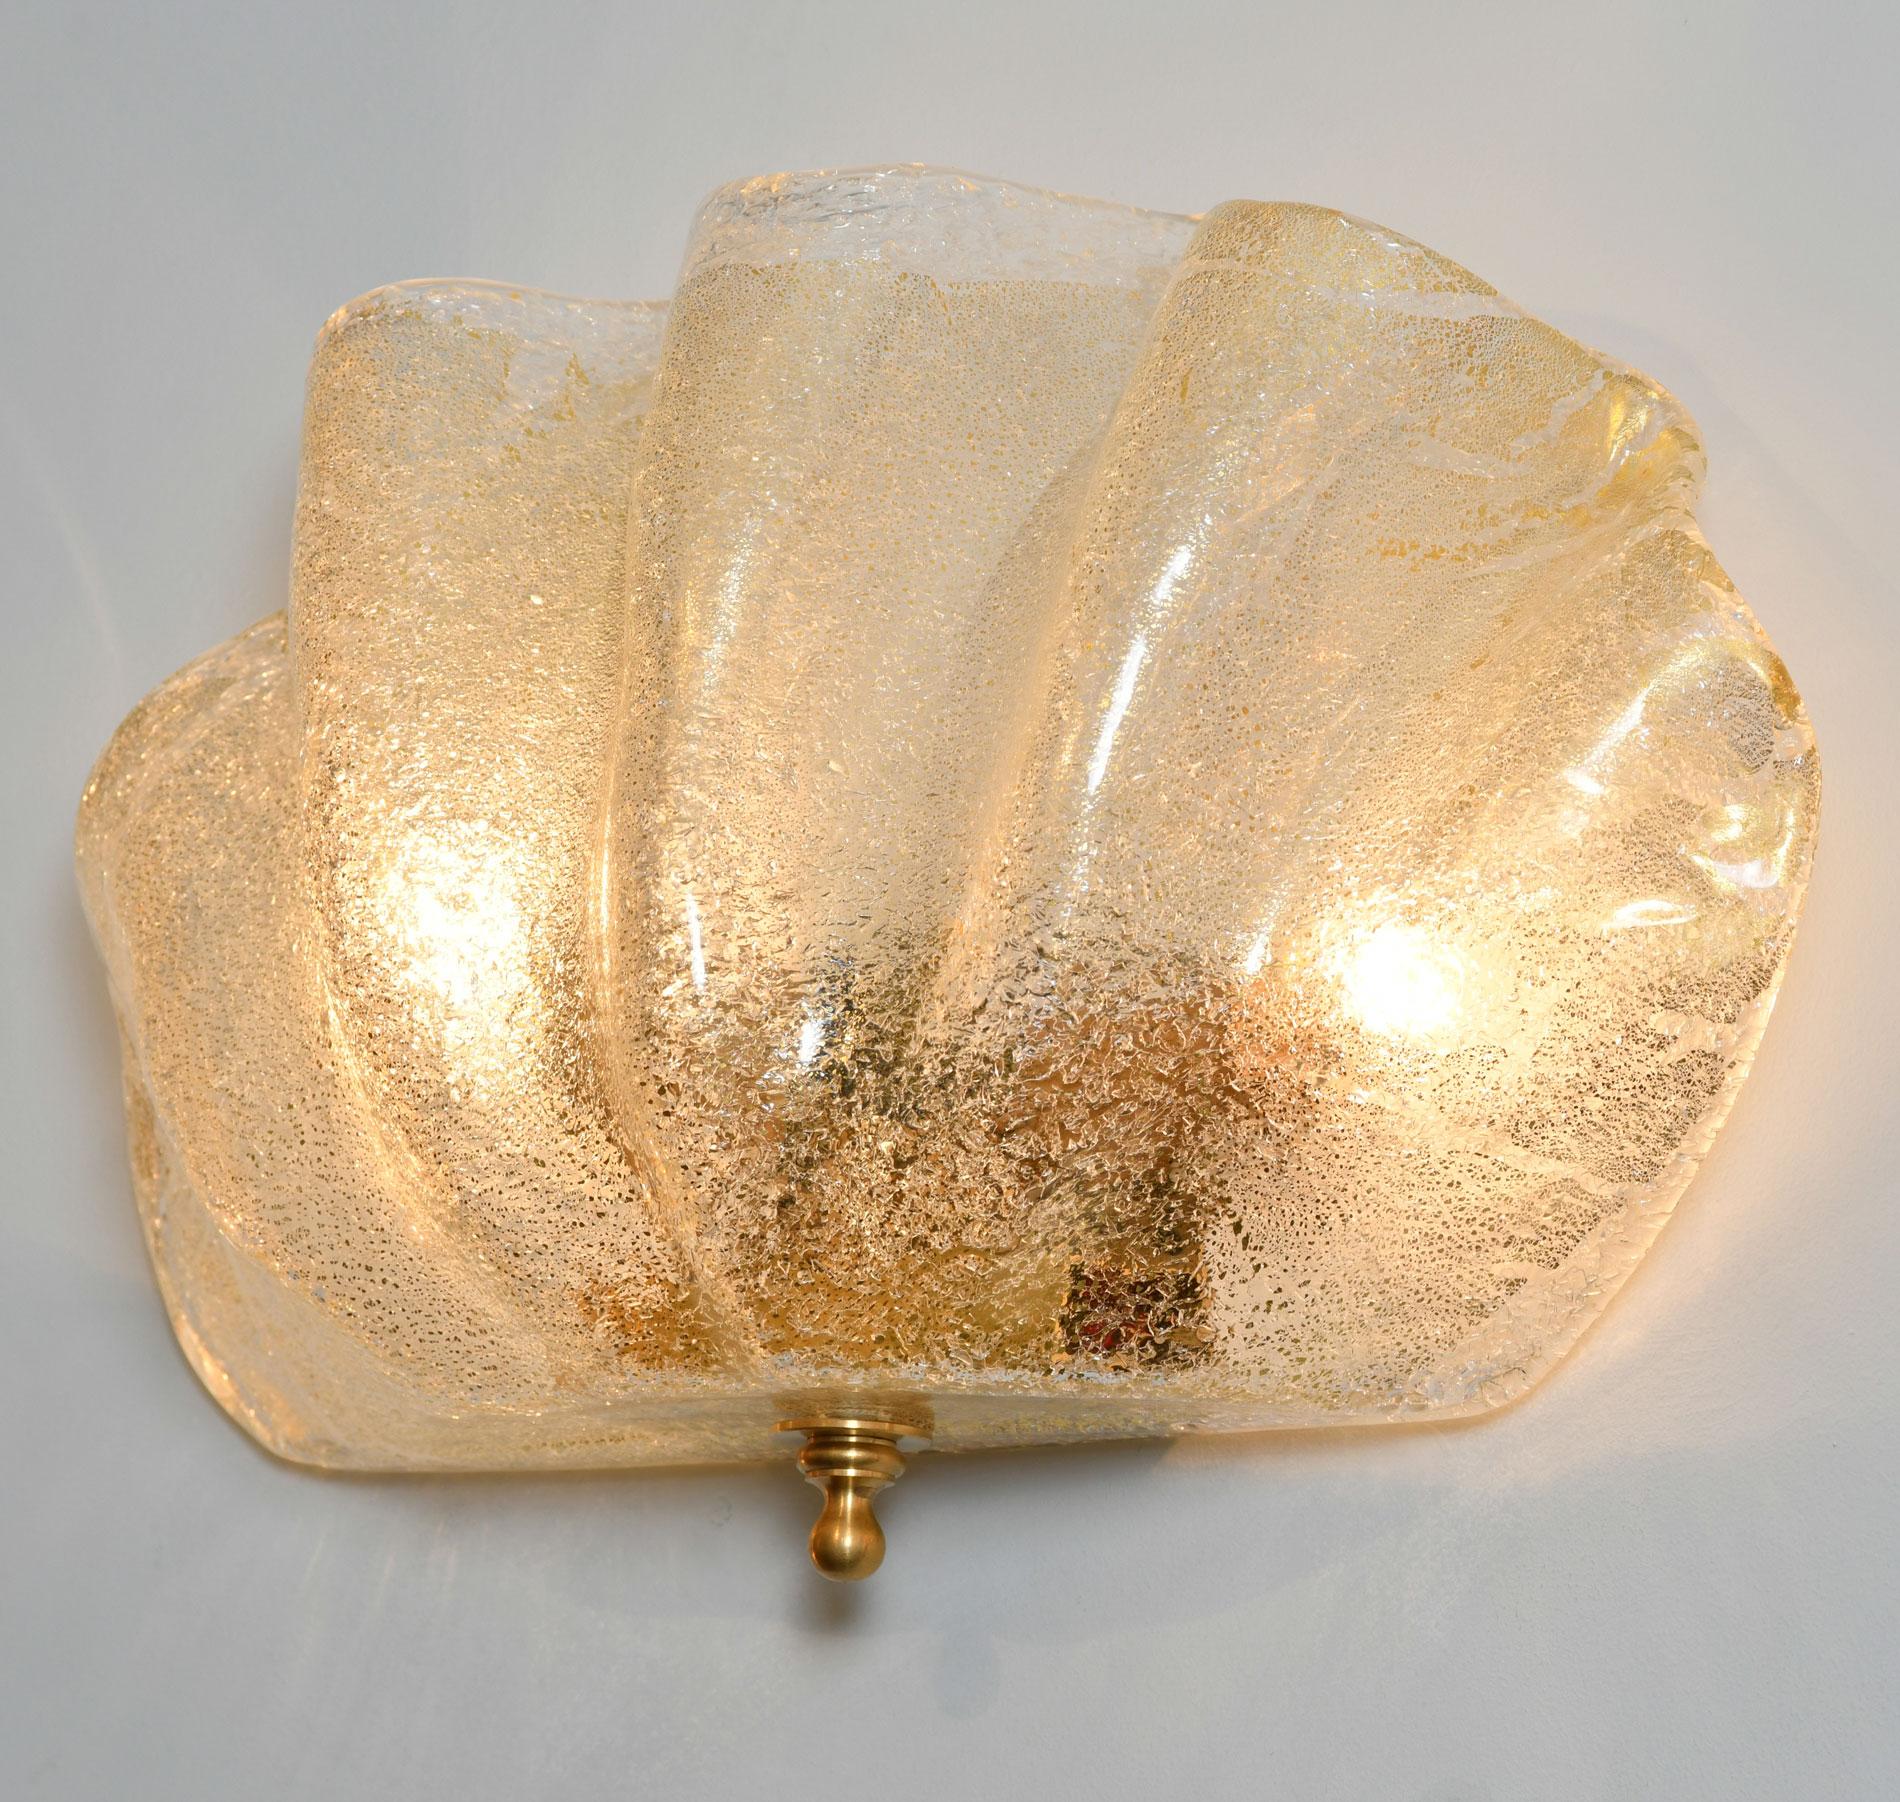 Contemporary textured subtle gold and clear Murano glass 'clam shell' wall light with gold fitting and decorative finial detailing. Exudes warm golden glow.